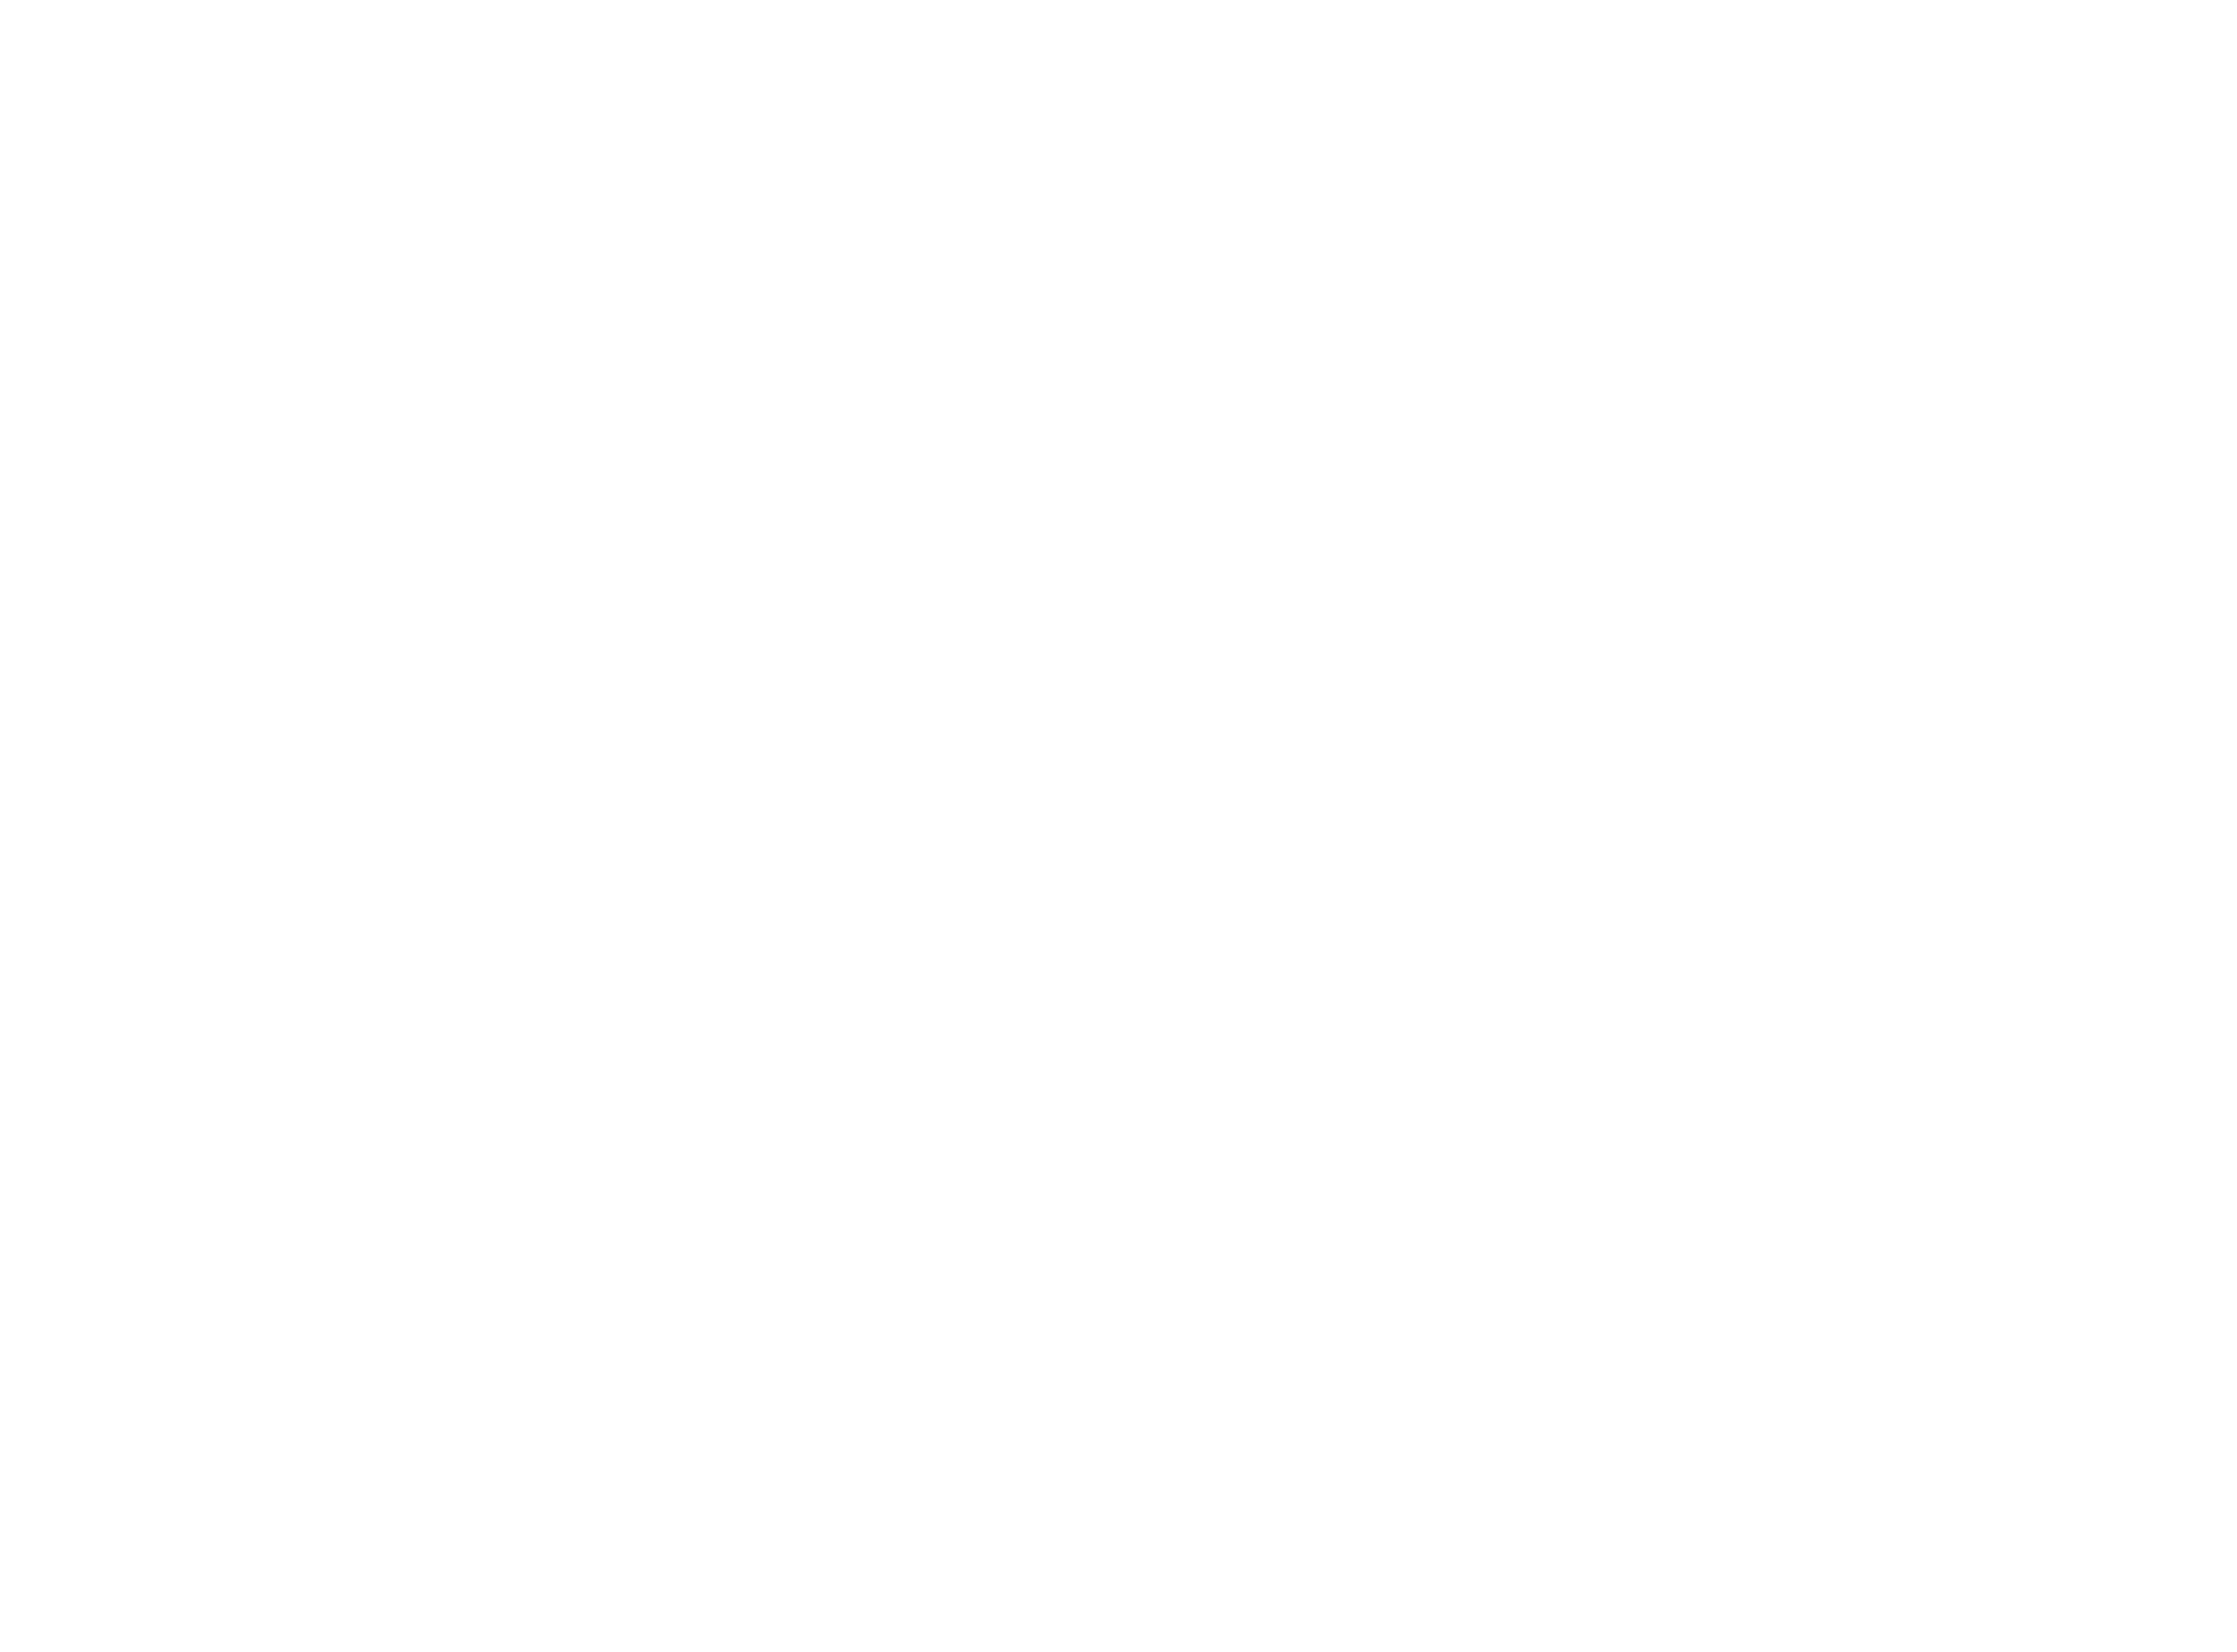 Deck Solutions